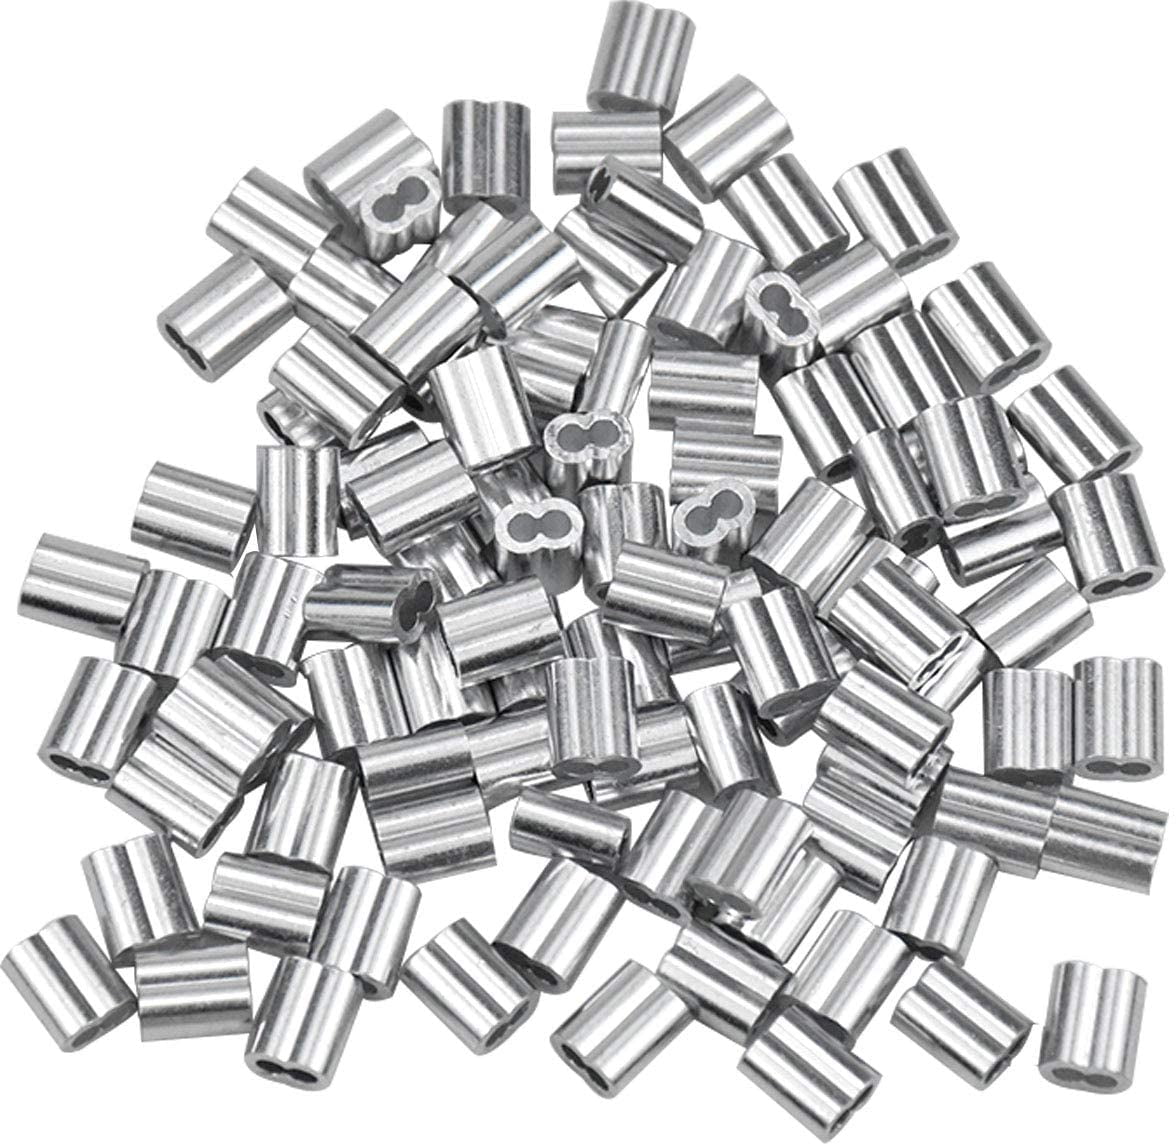 3mm Dia Steel Wire Rope Aluminum Ferrules Sleeves Clip Cable Crimps 100pcs 